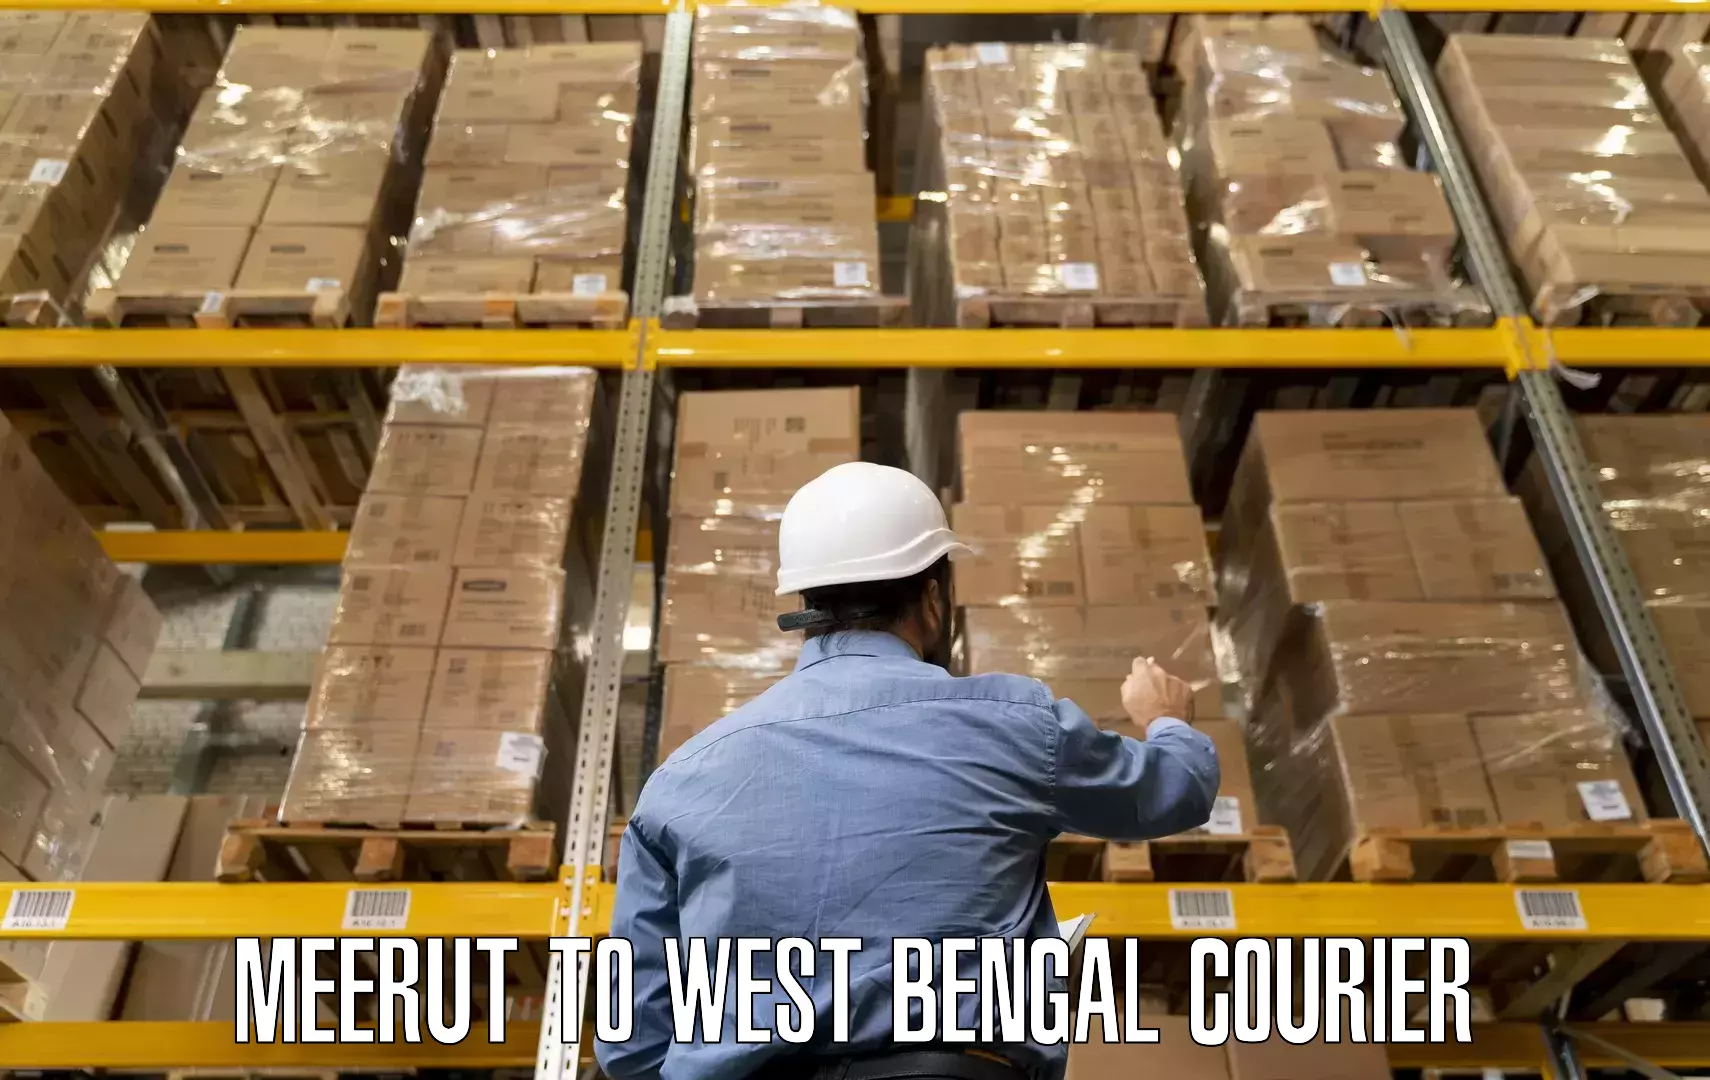 Furniture delivery service Meerut to West Bengal